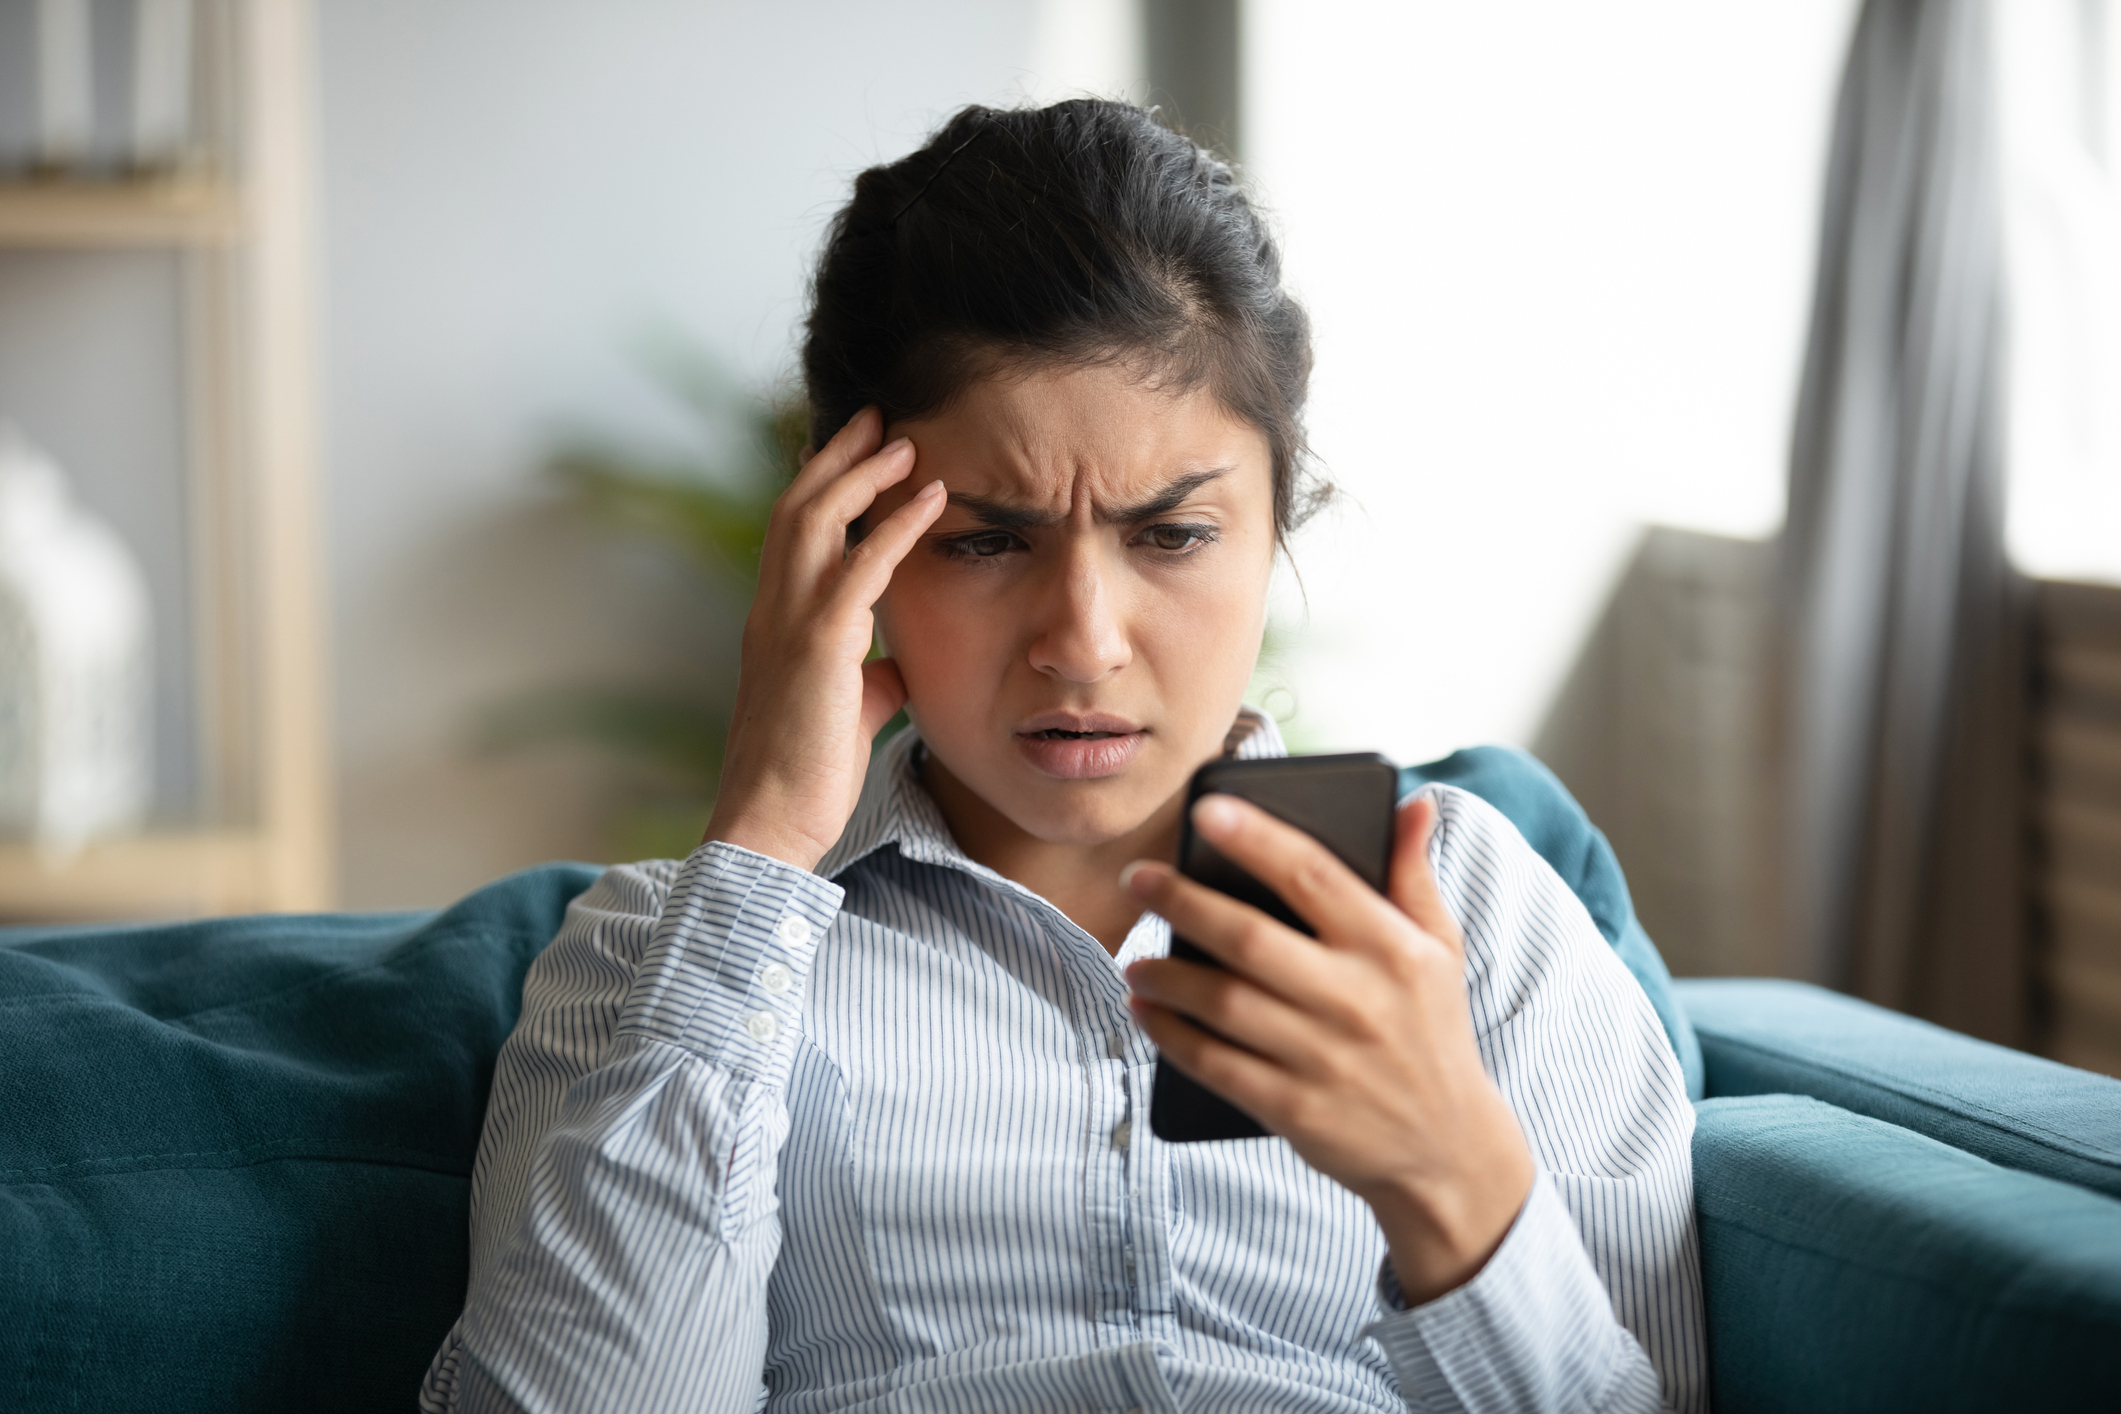 Woman looks concerned while holding phone 